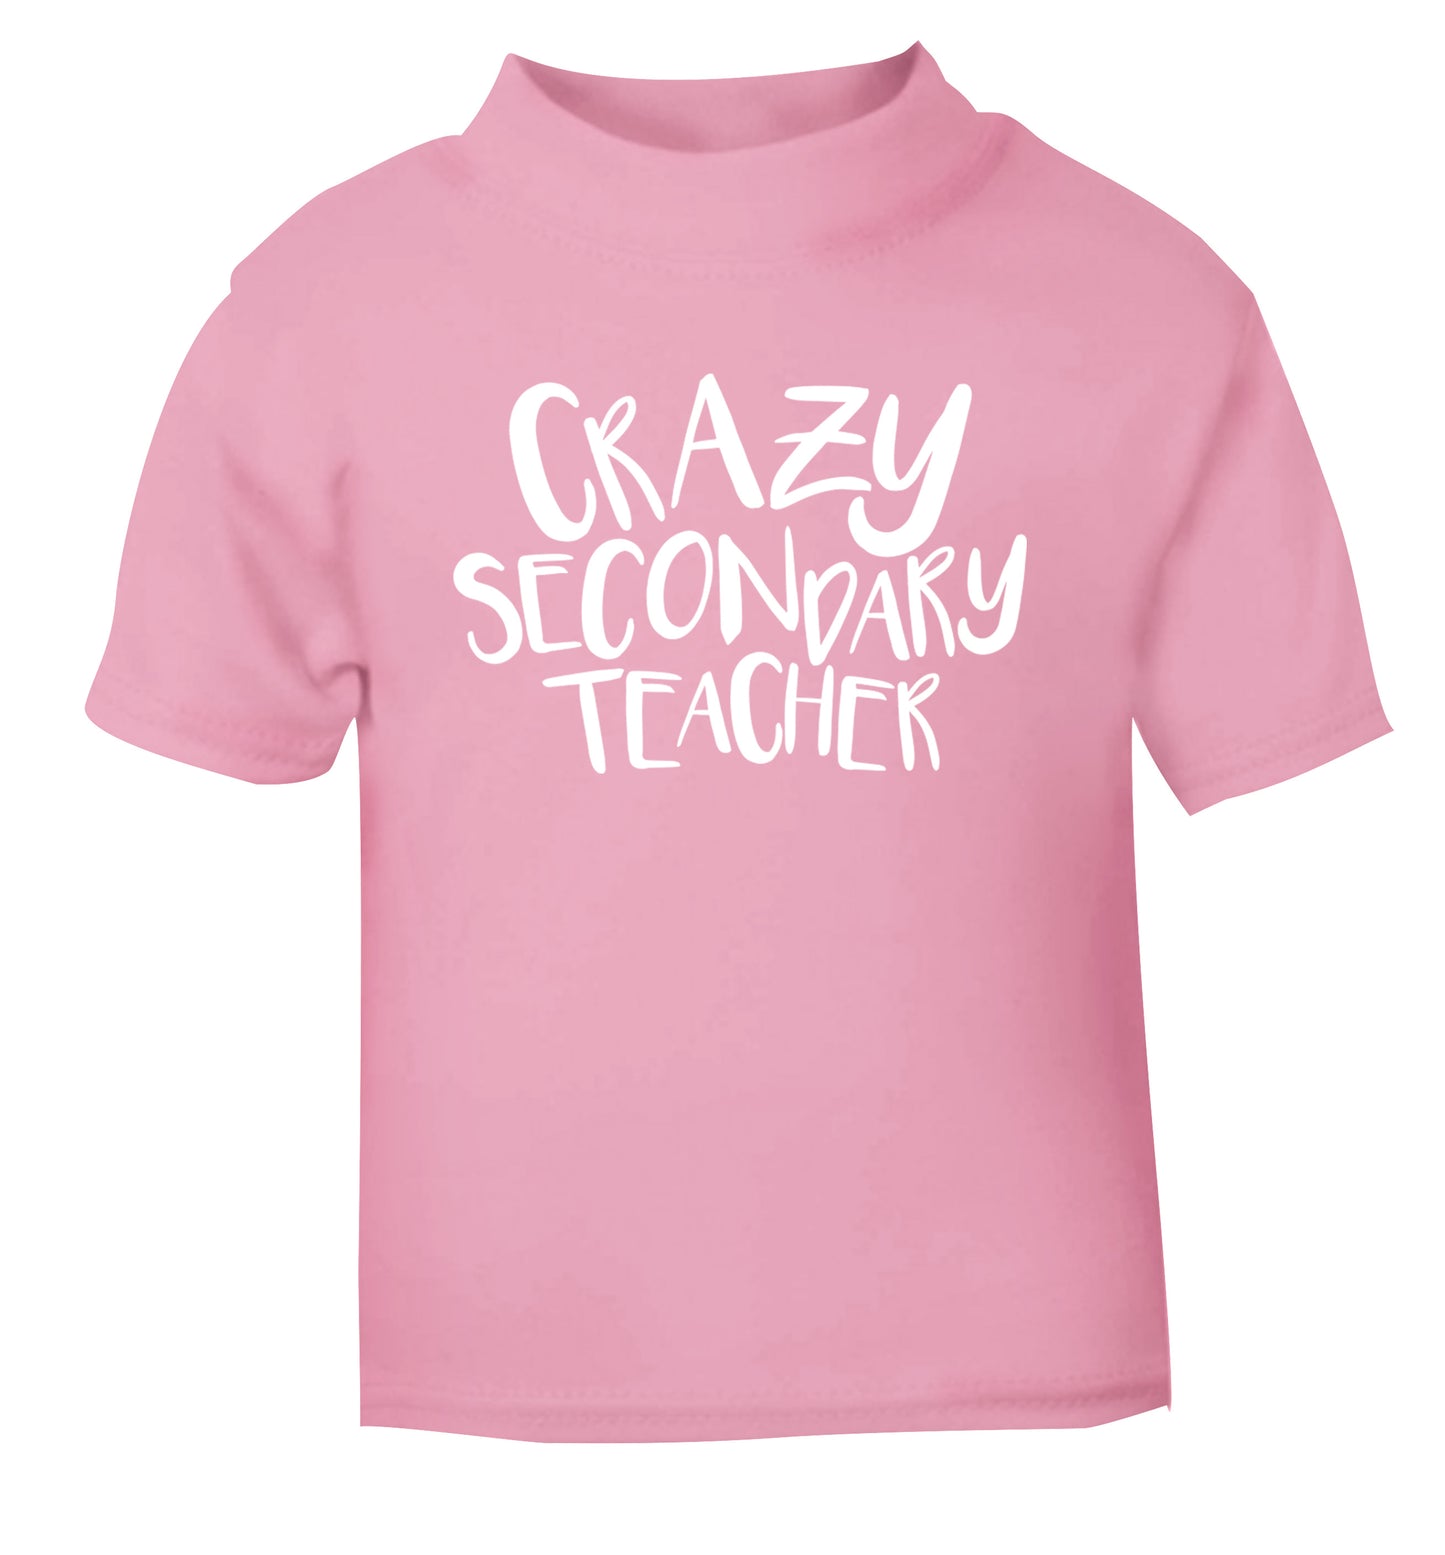 Crazy secondary teacher light pink Baby Toddler Tshirt 2 Years